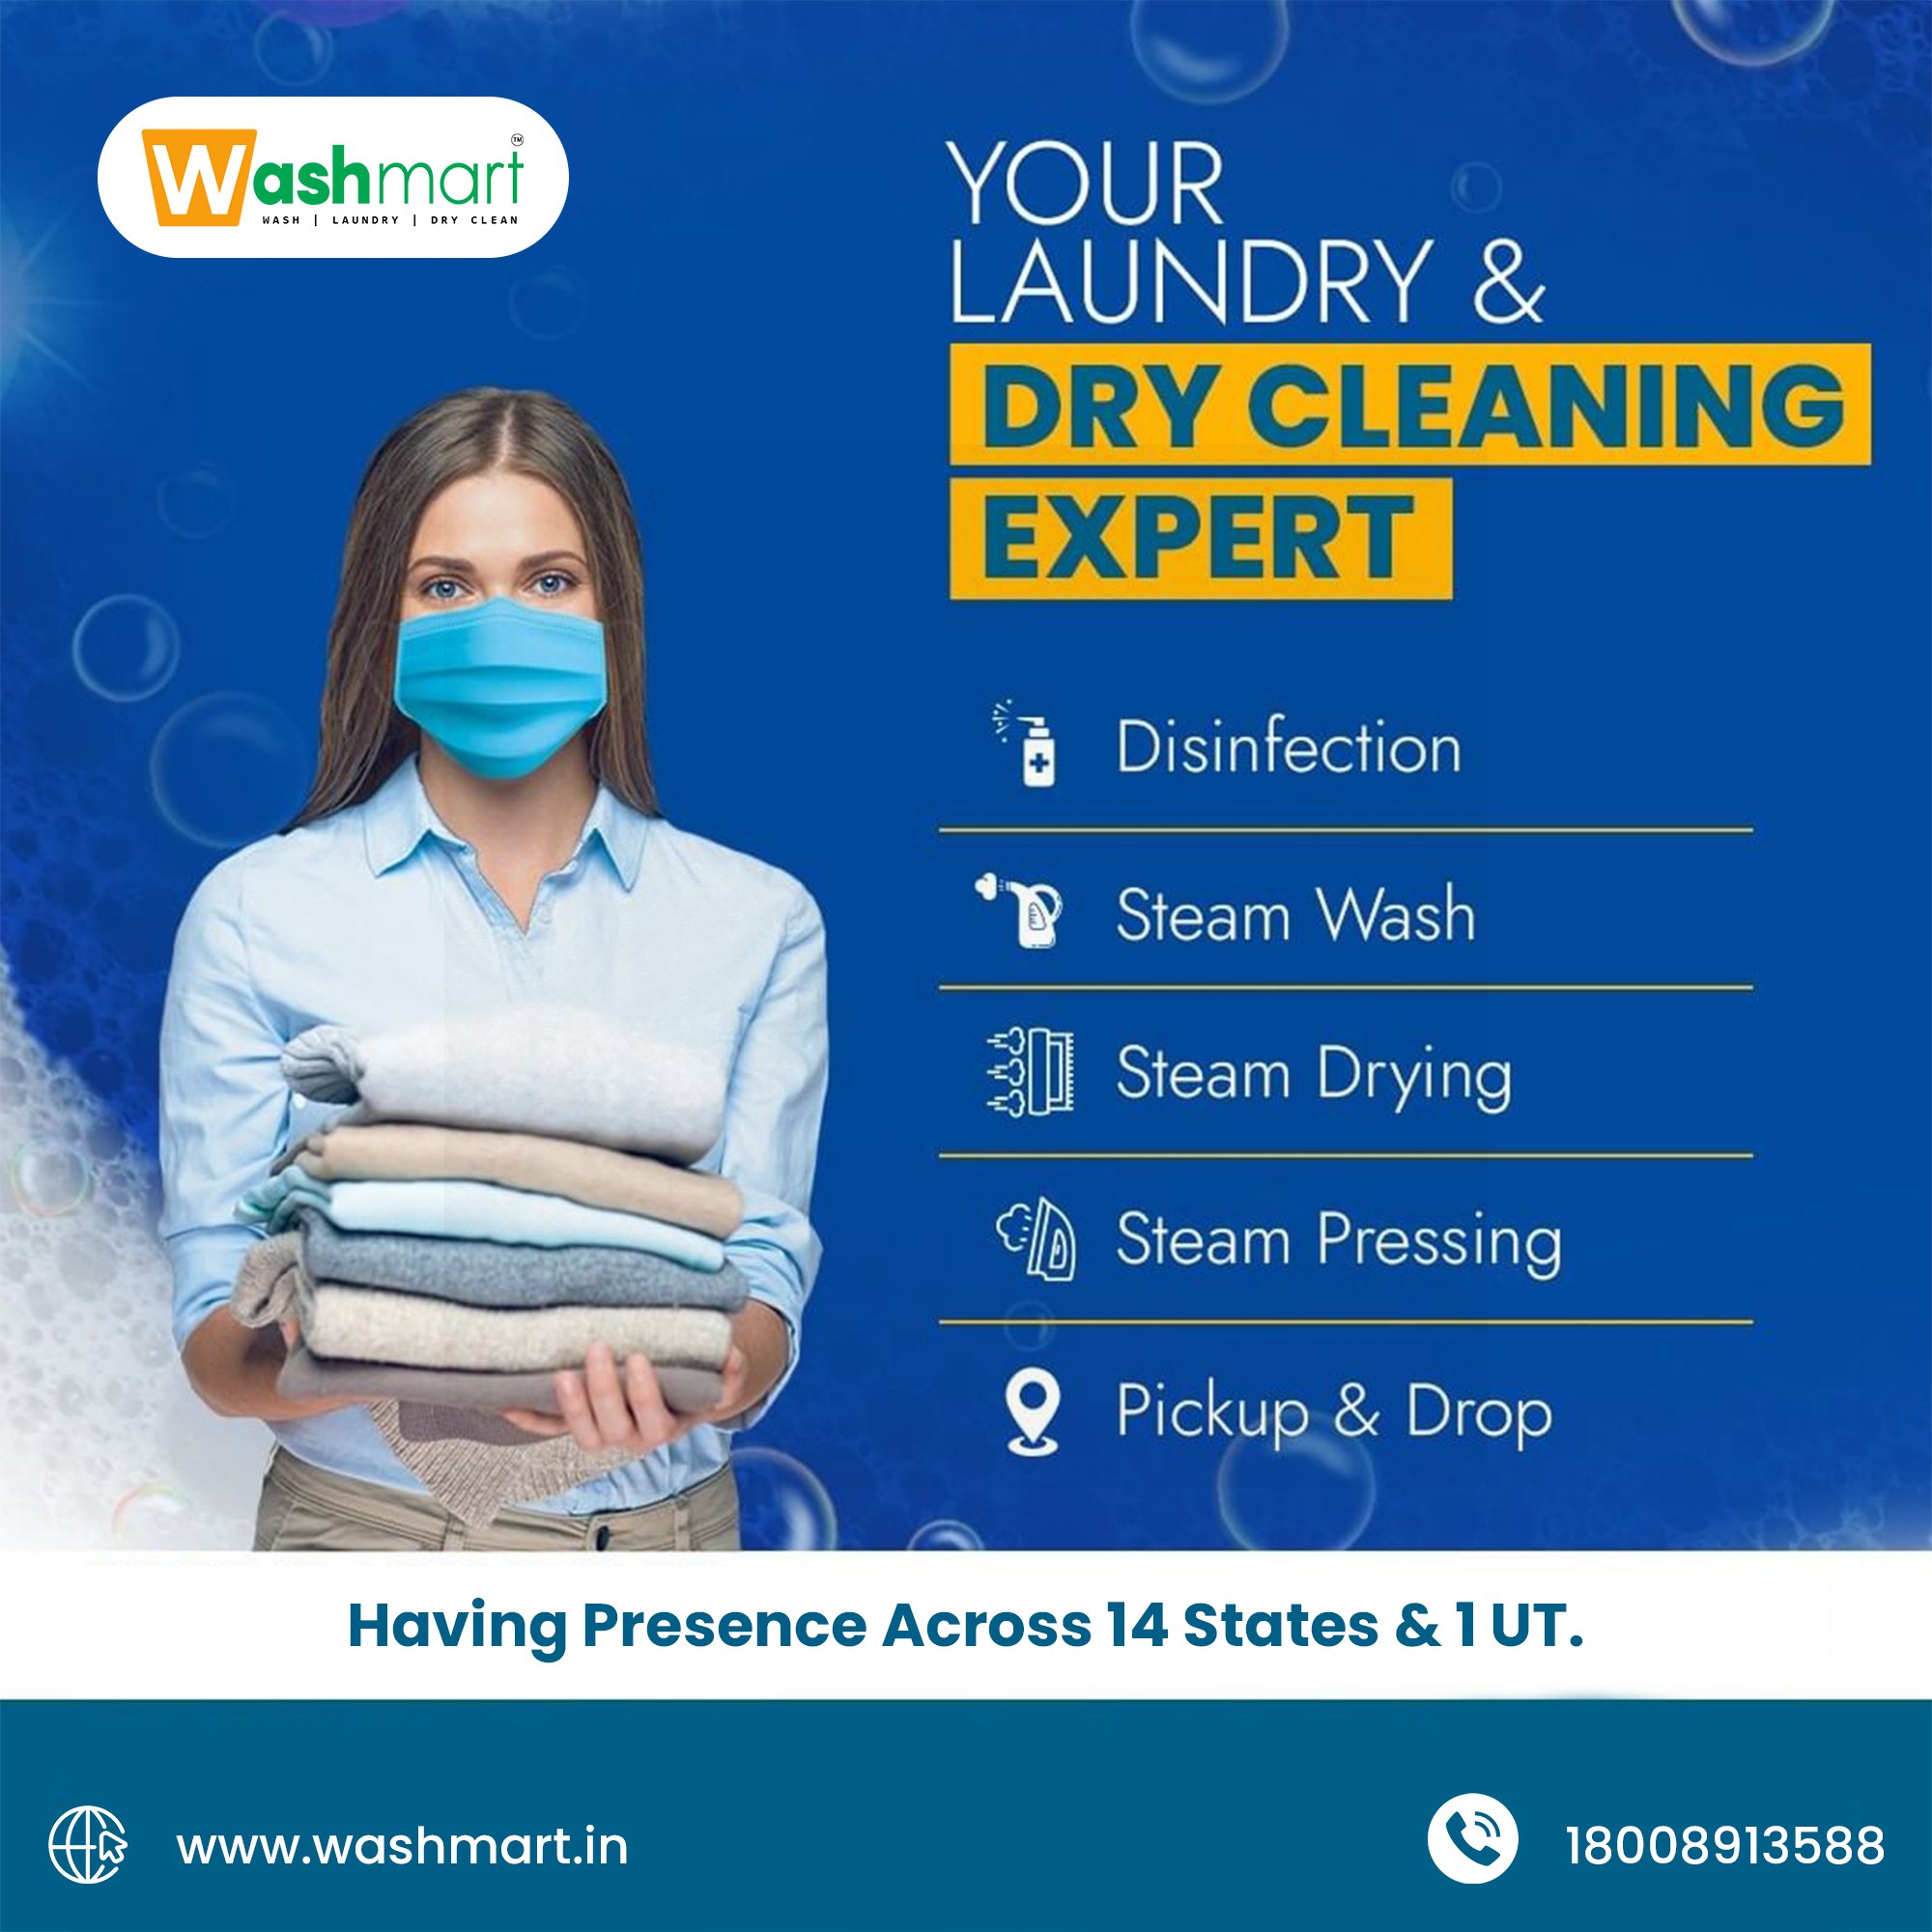 Are You Seeking for Best Dry-cleaning Service in India?